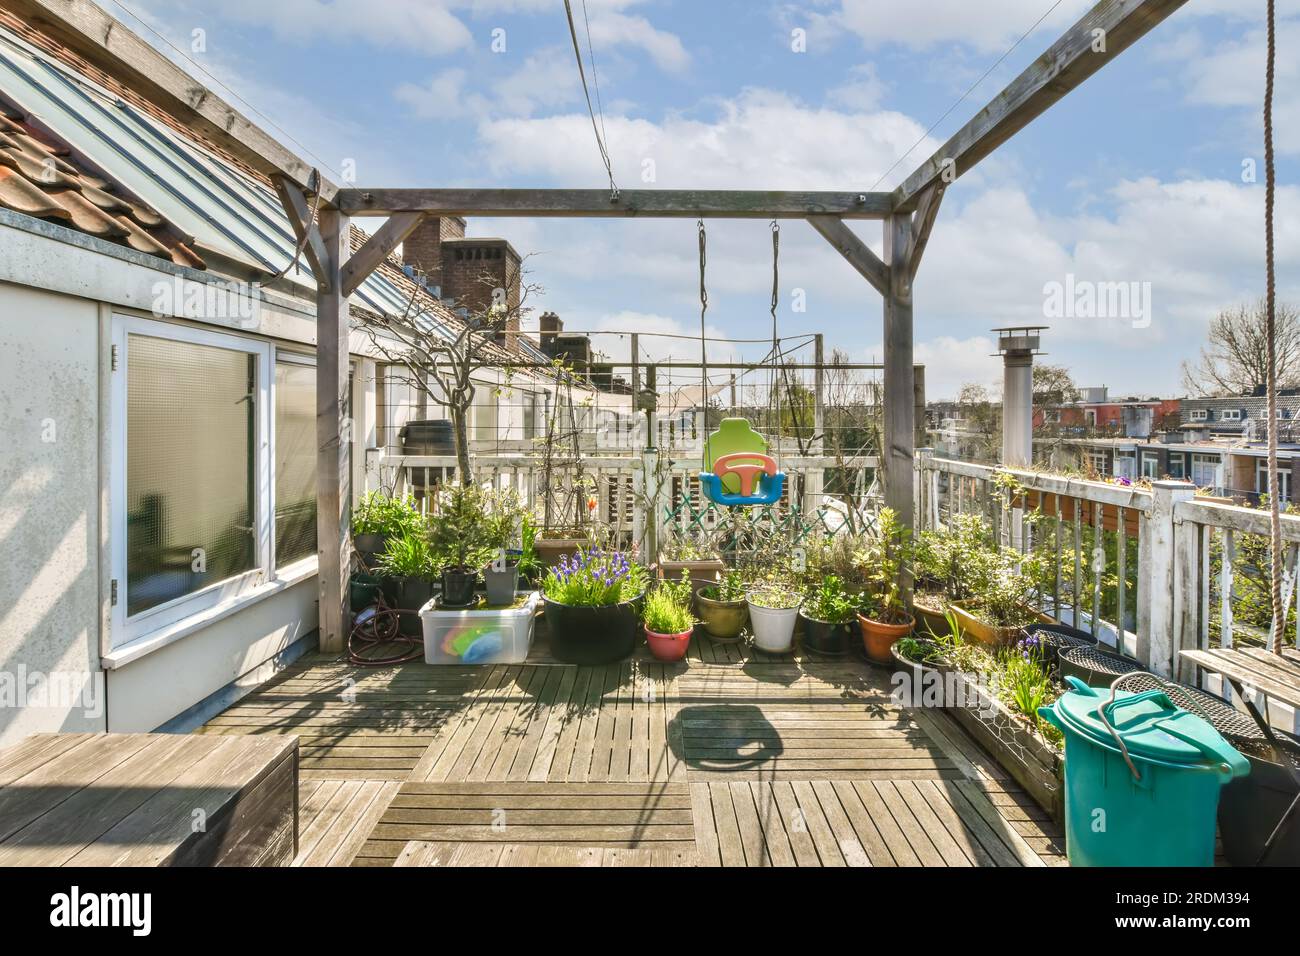 a roof garden with potted plants on the deck and an overhead view of the city in the background, new york, ny Stock Photo